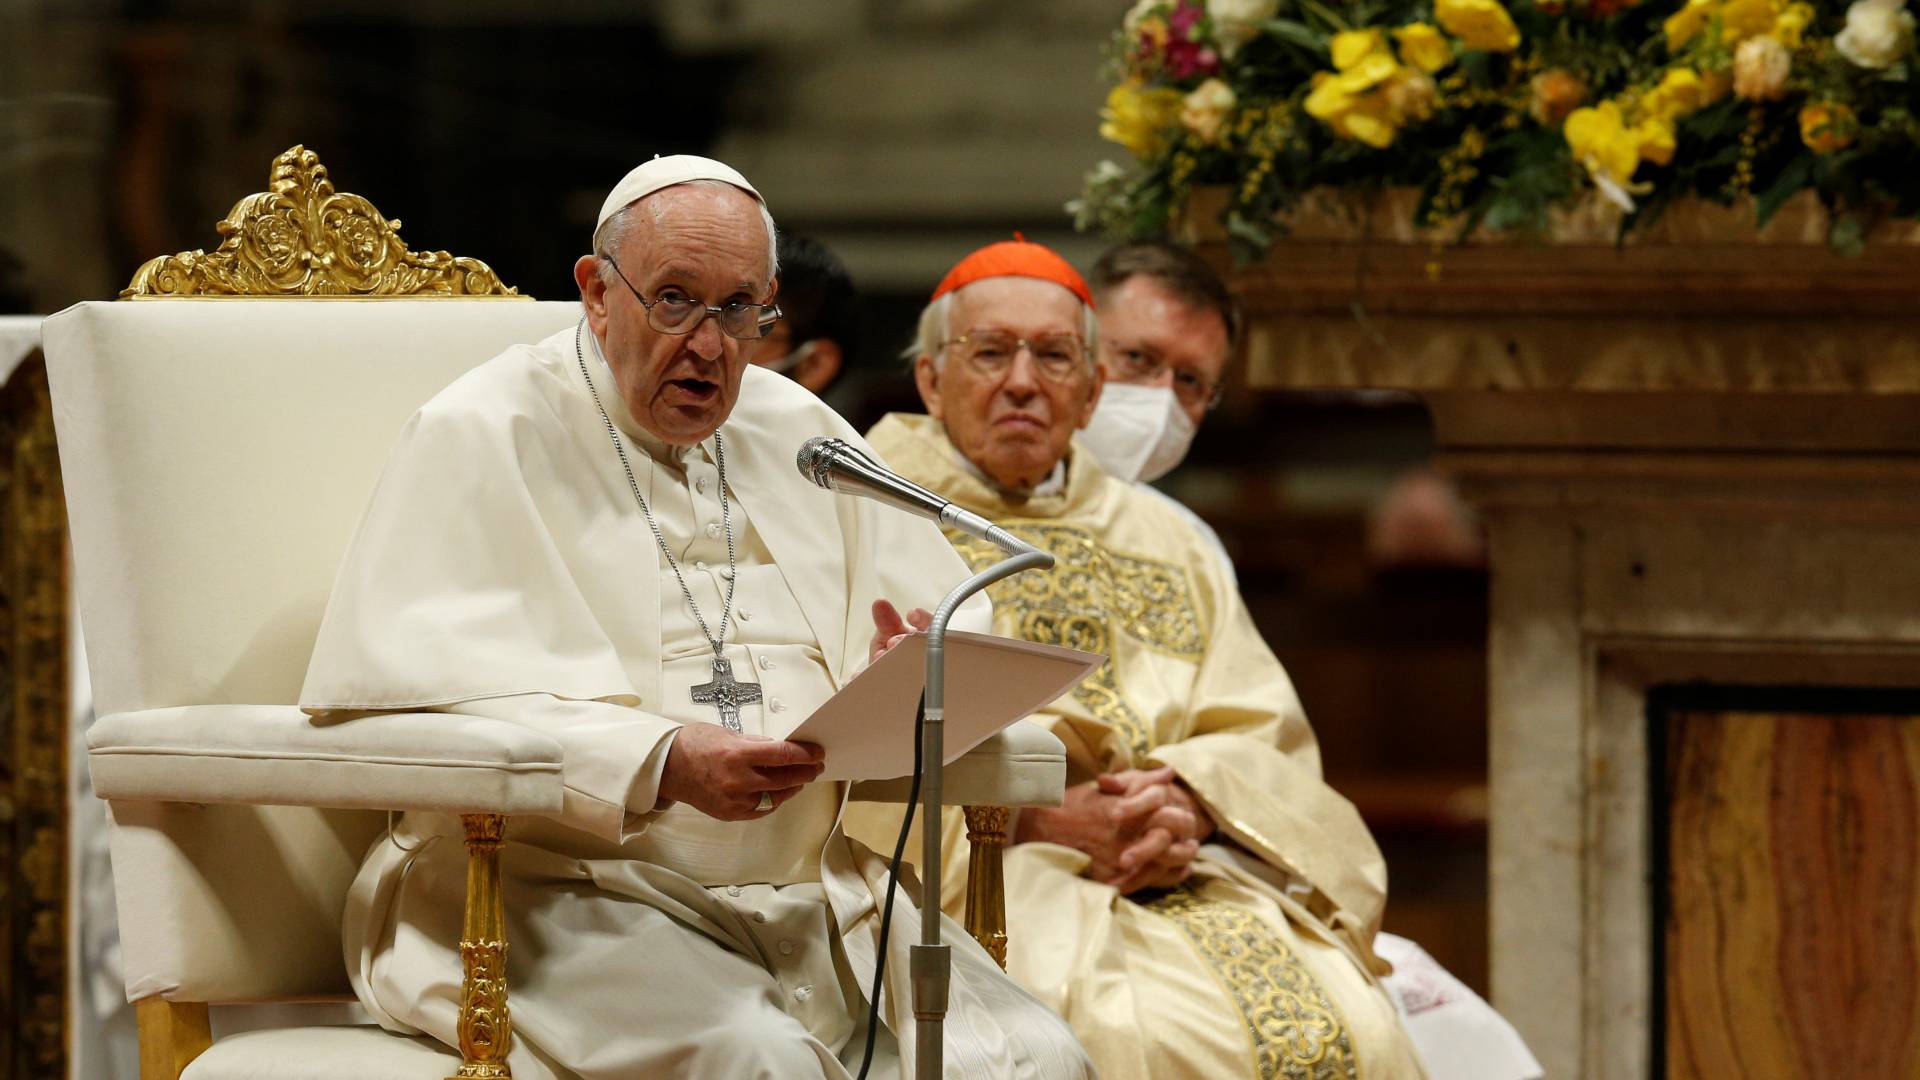 Easter 2022: Pope Francis’ homily at the Easter Vigil